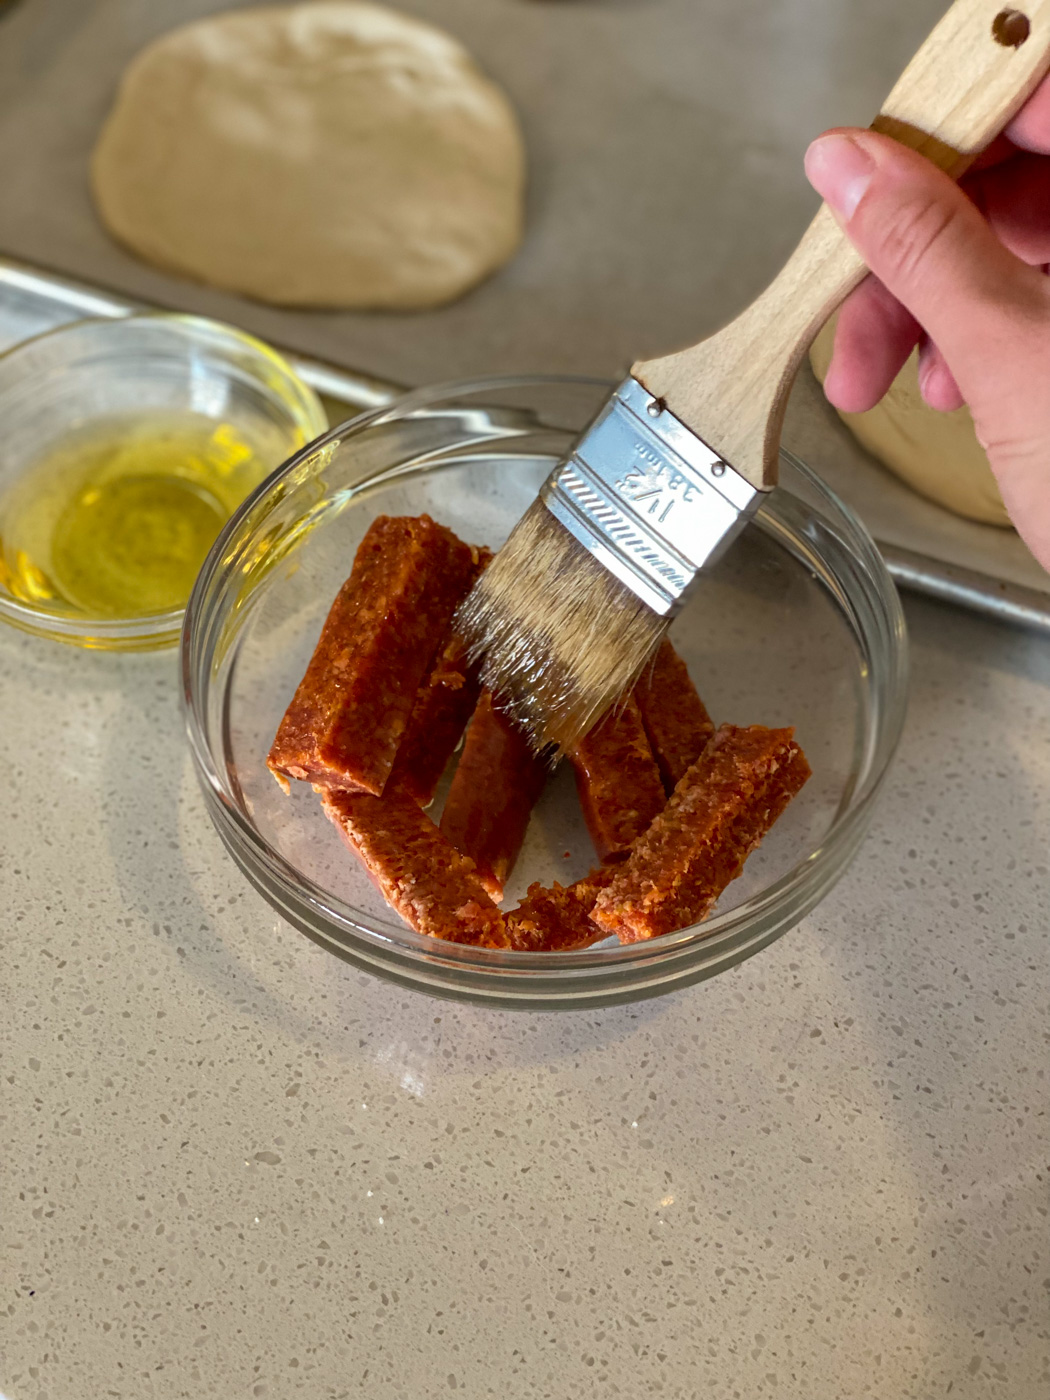 Brush pepperoni with olive oil.